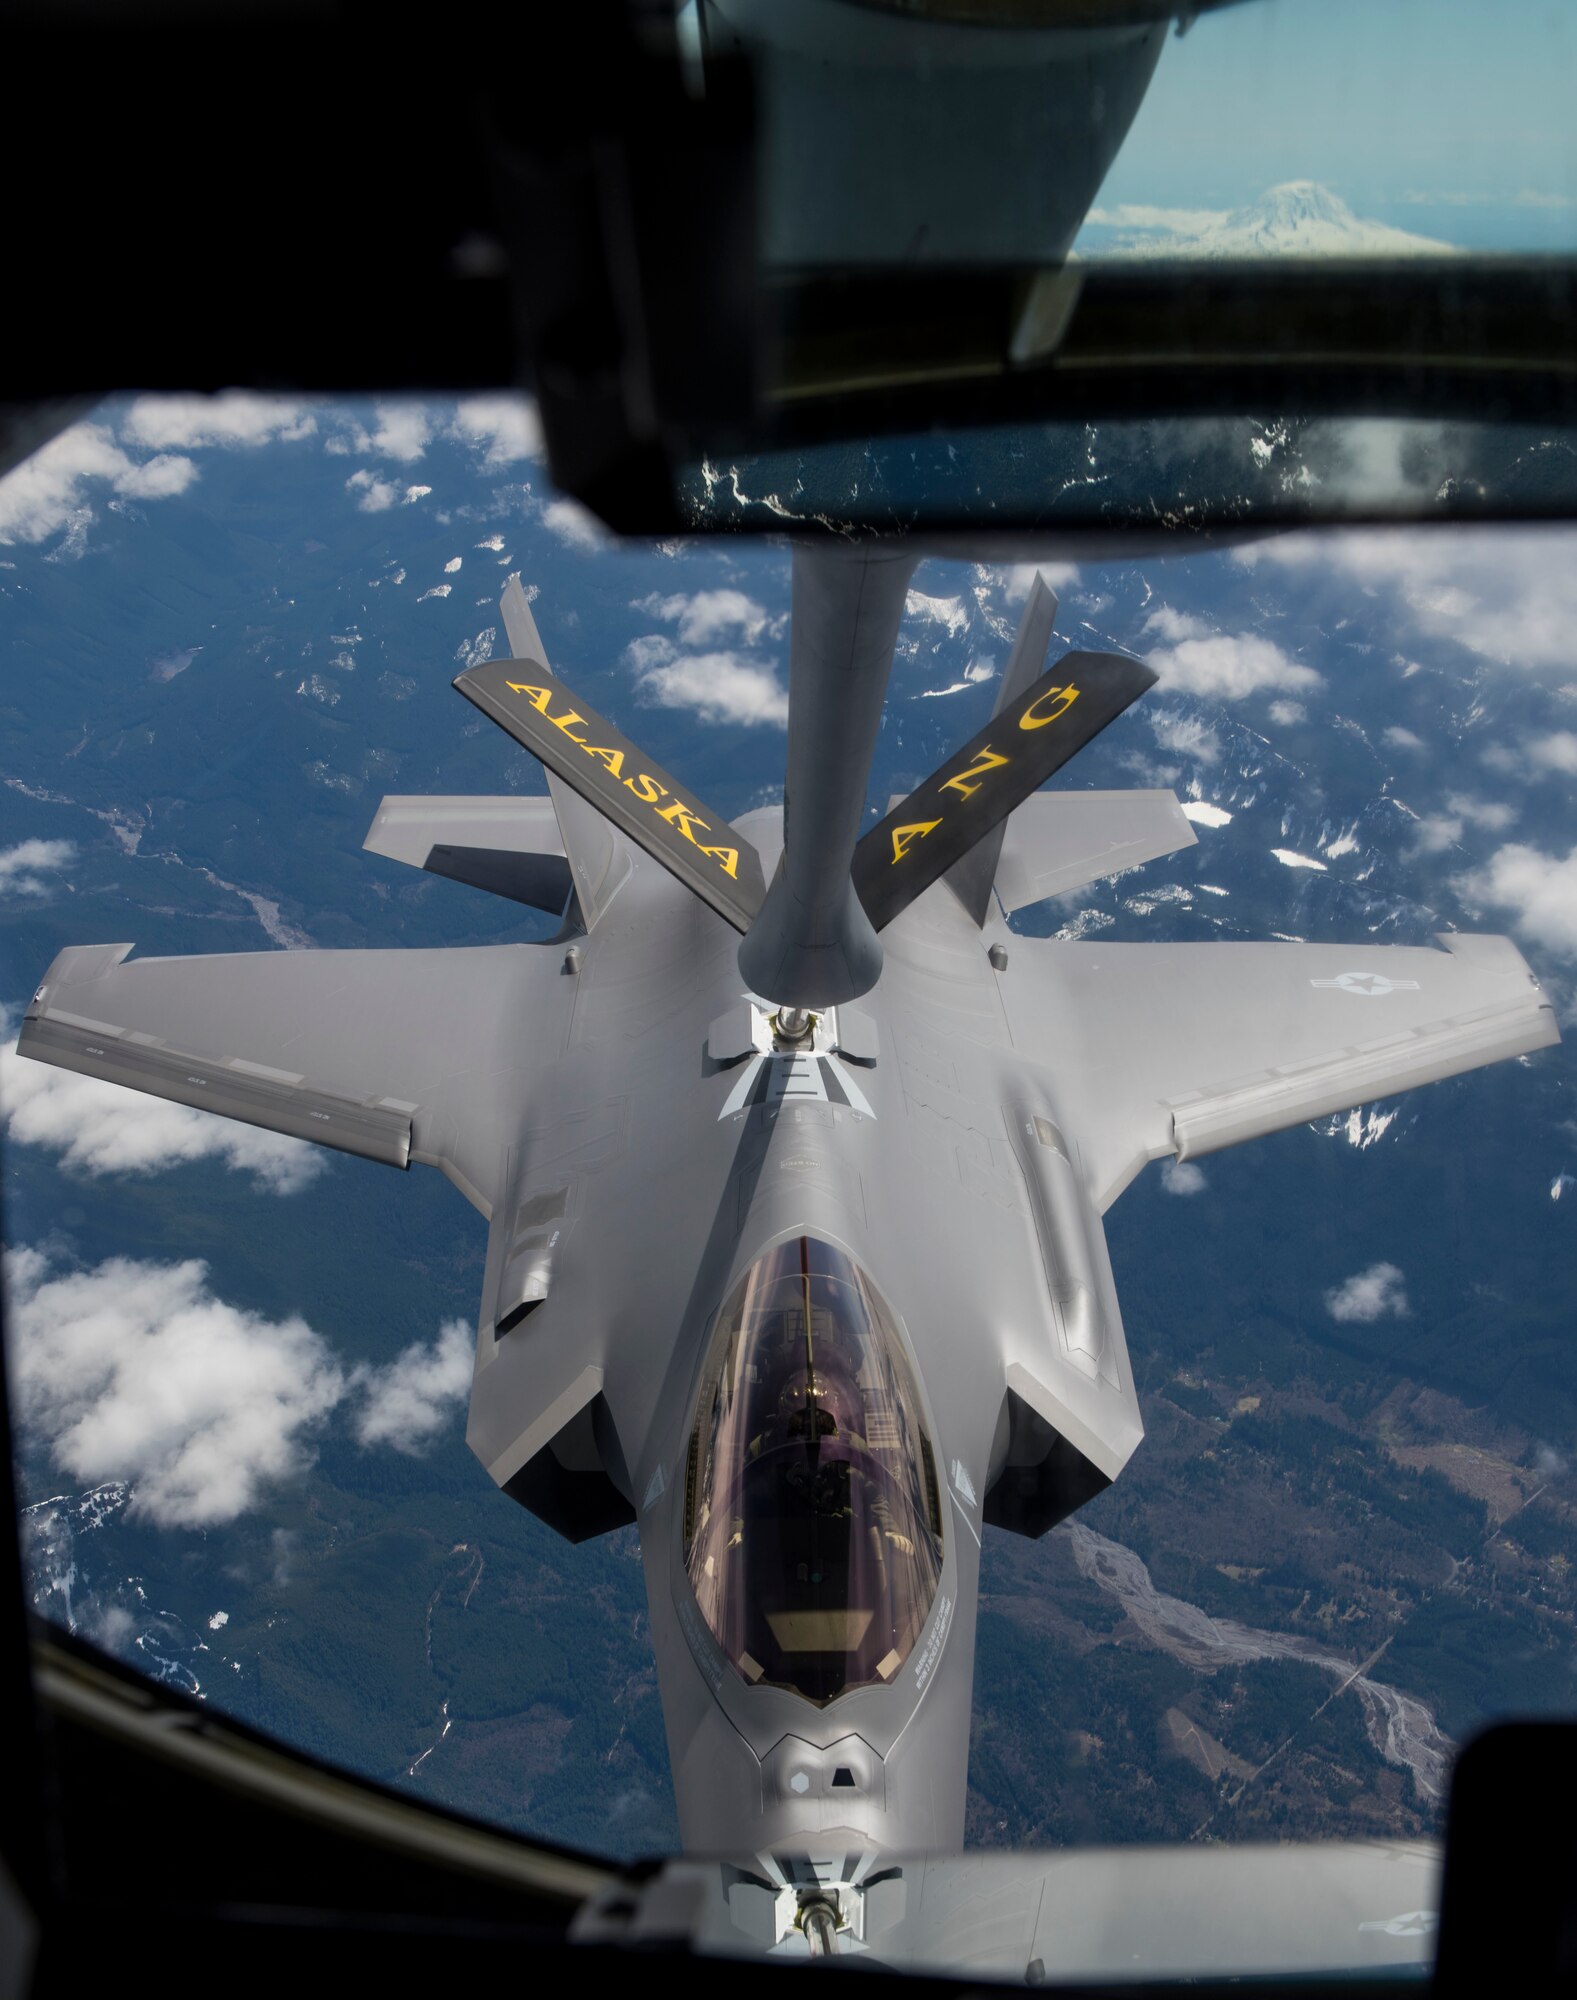 A new F-35A Lightning II refuels mid-air by a 168th Wing, Alaska Air National Guard, KC-135R Stratrotanker, enroute from the Lockheed Martin factory in Fort Worth, Texas, to the 354th Fighter Wing, Eielson Air Force Base, Alaska, April 21, 2020.